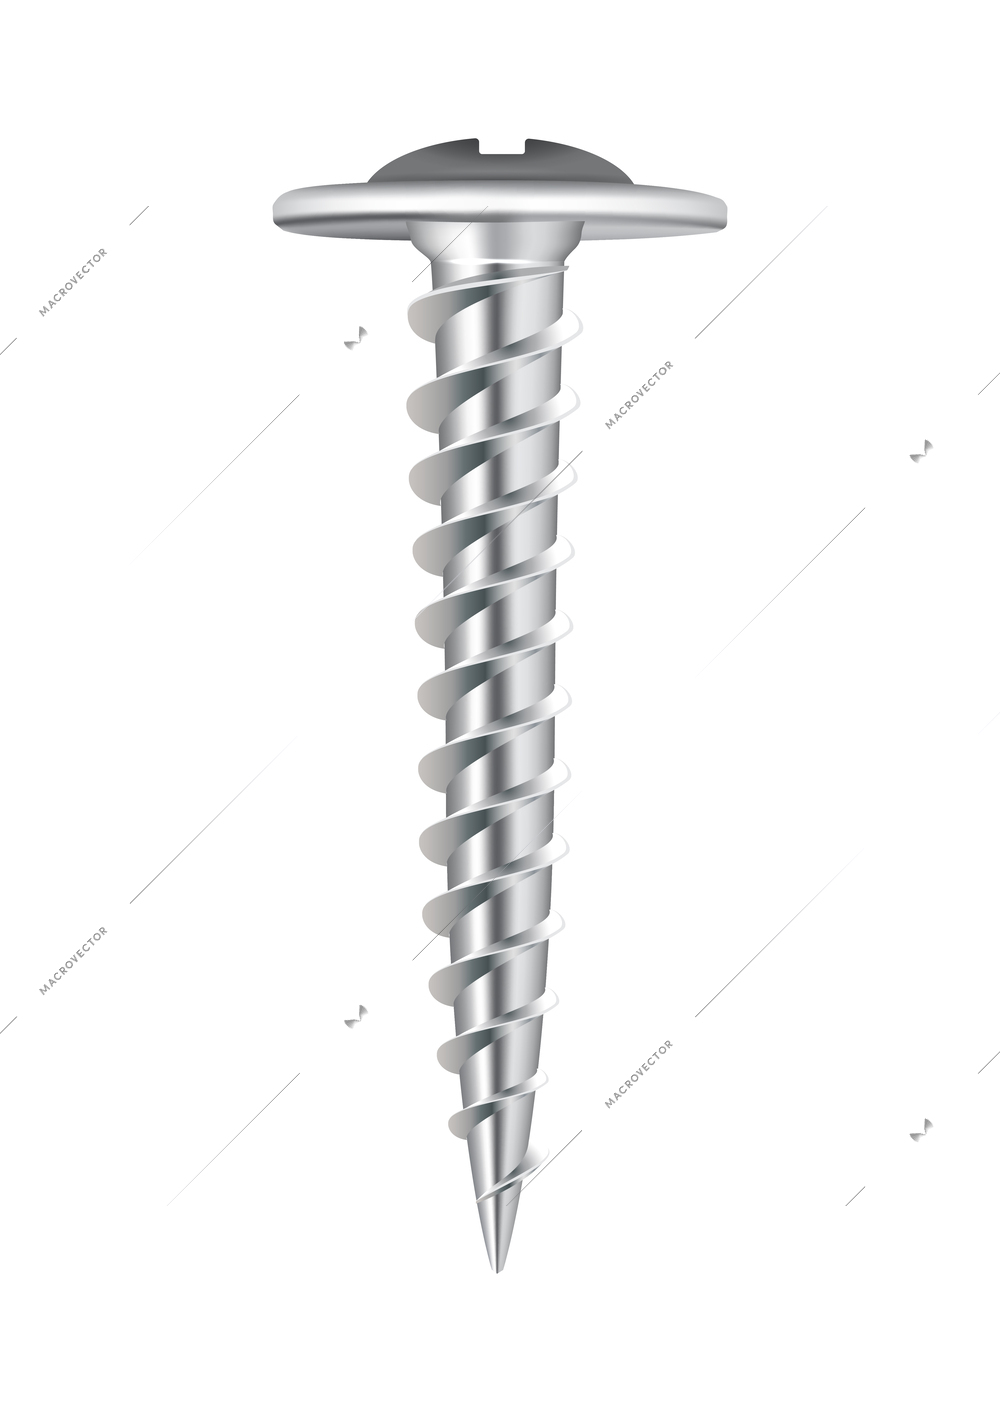 Metal screws bolts nails plates realistic composition with isolated top view image of iron hardware vector illustration